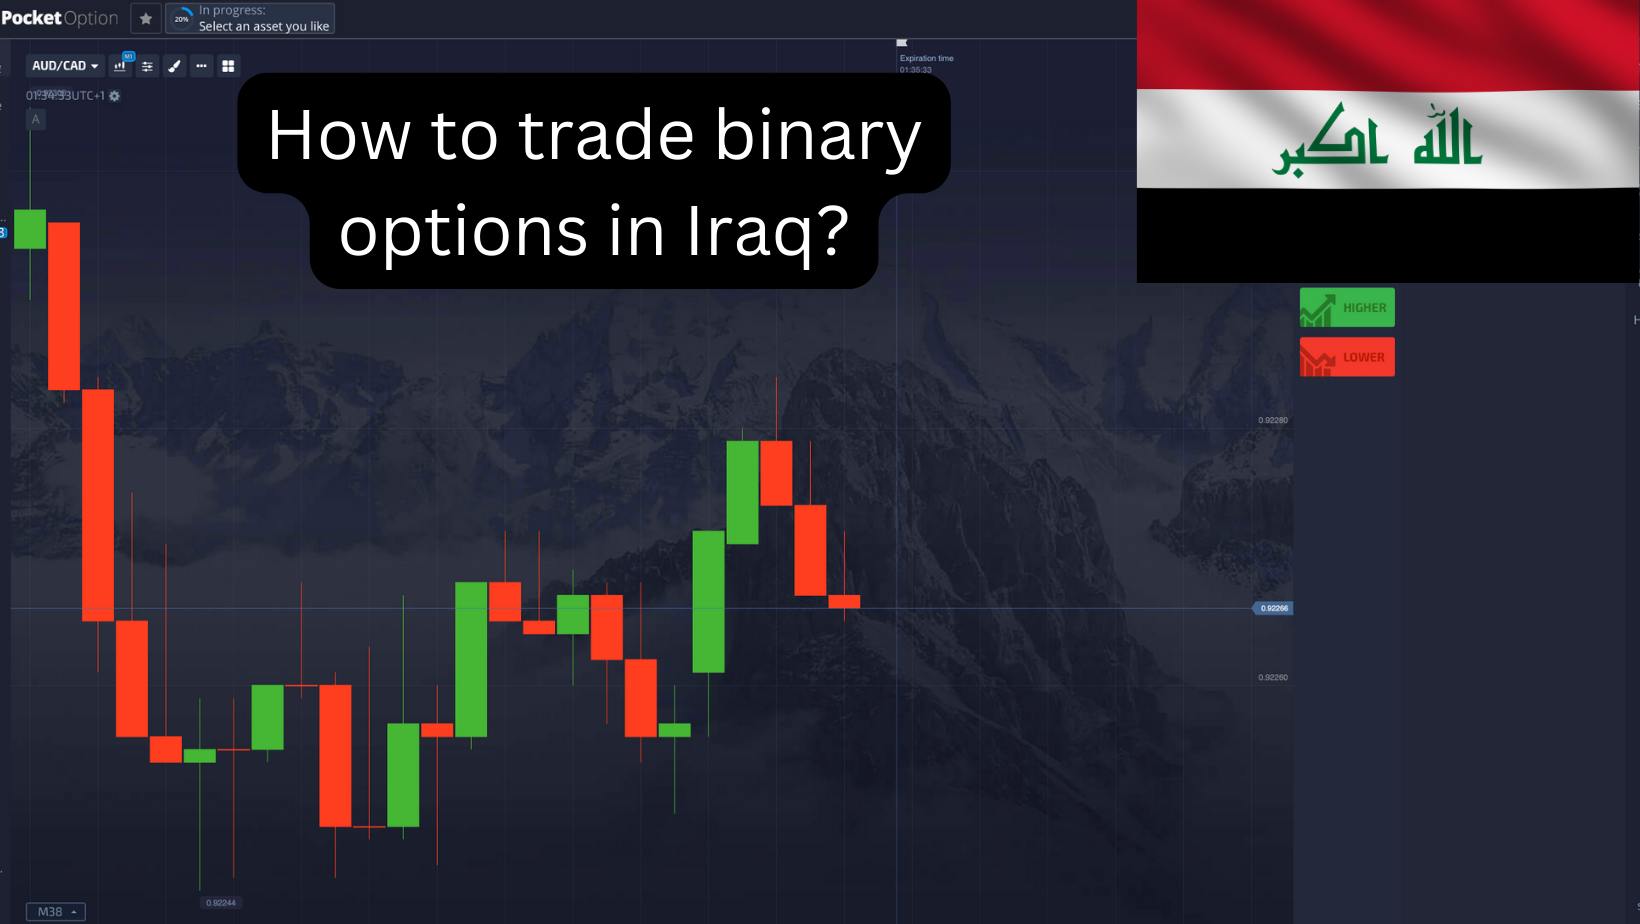 How to trade binary options in Iraq?